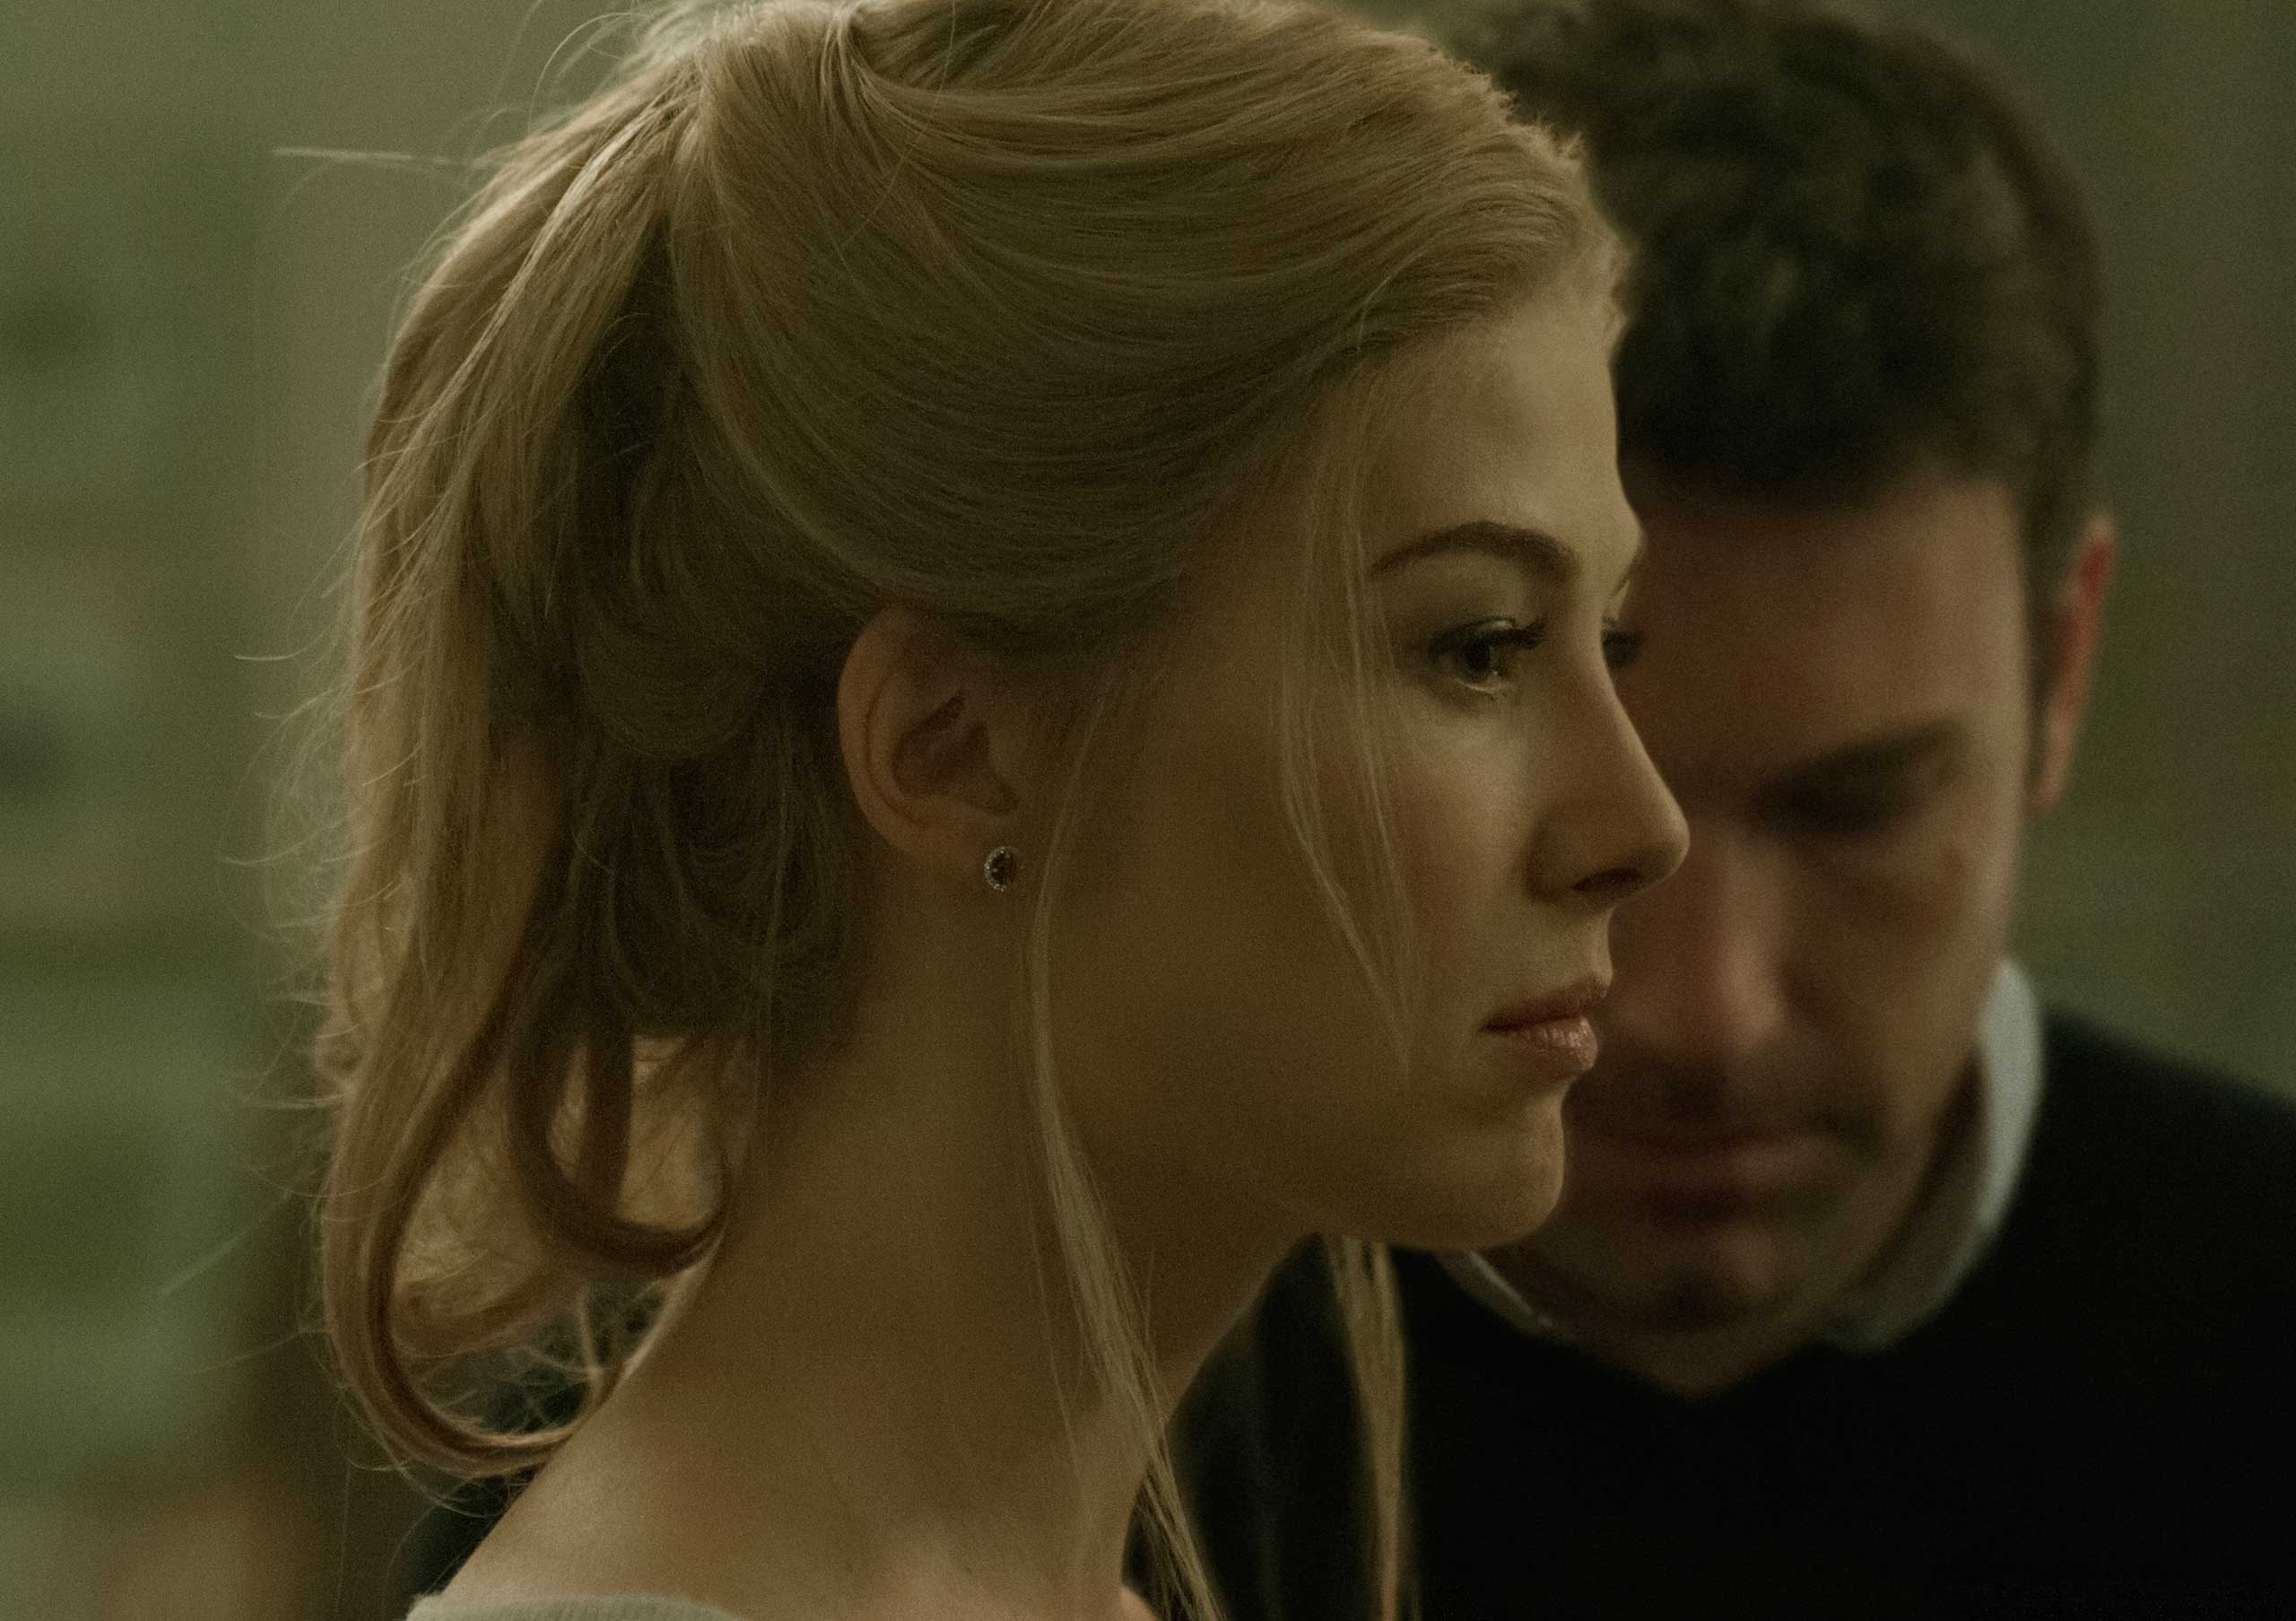 Rosamund Pike portrays Amy Dunne, whose mysterious disappearance turns her husband into a possible murder suspect. (Photo: Merrick Morton—Twentieth Century Fox/Regency Enterprises)